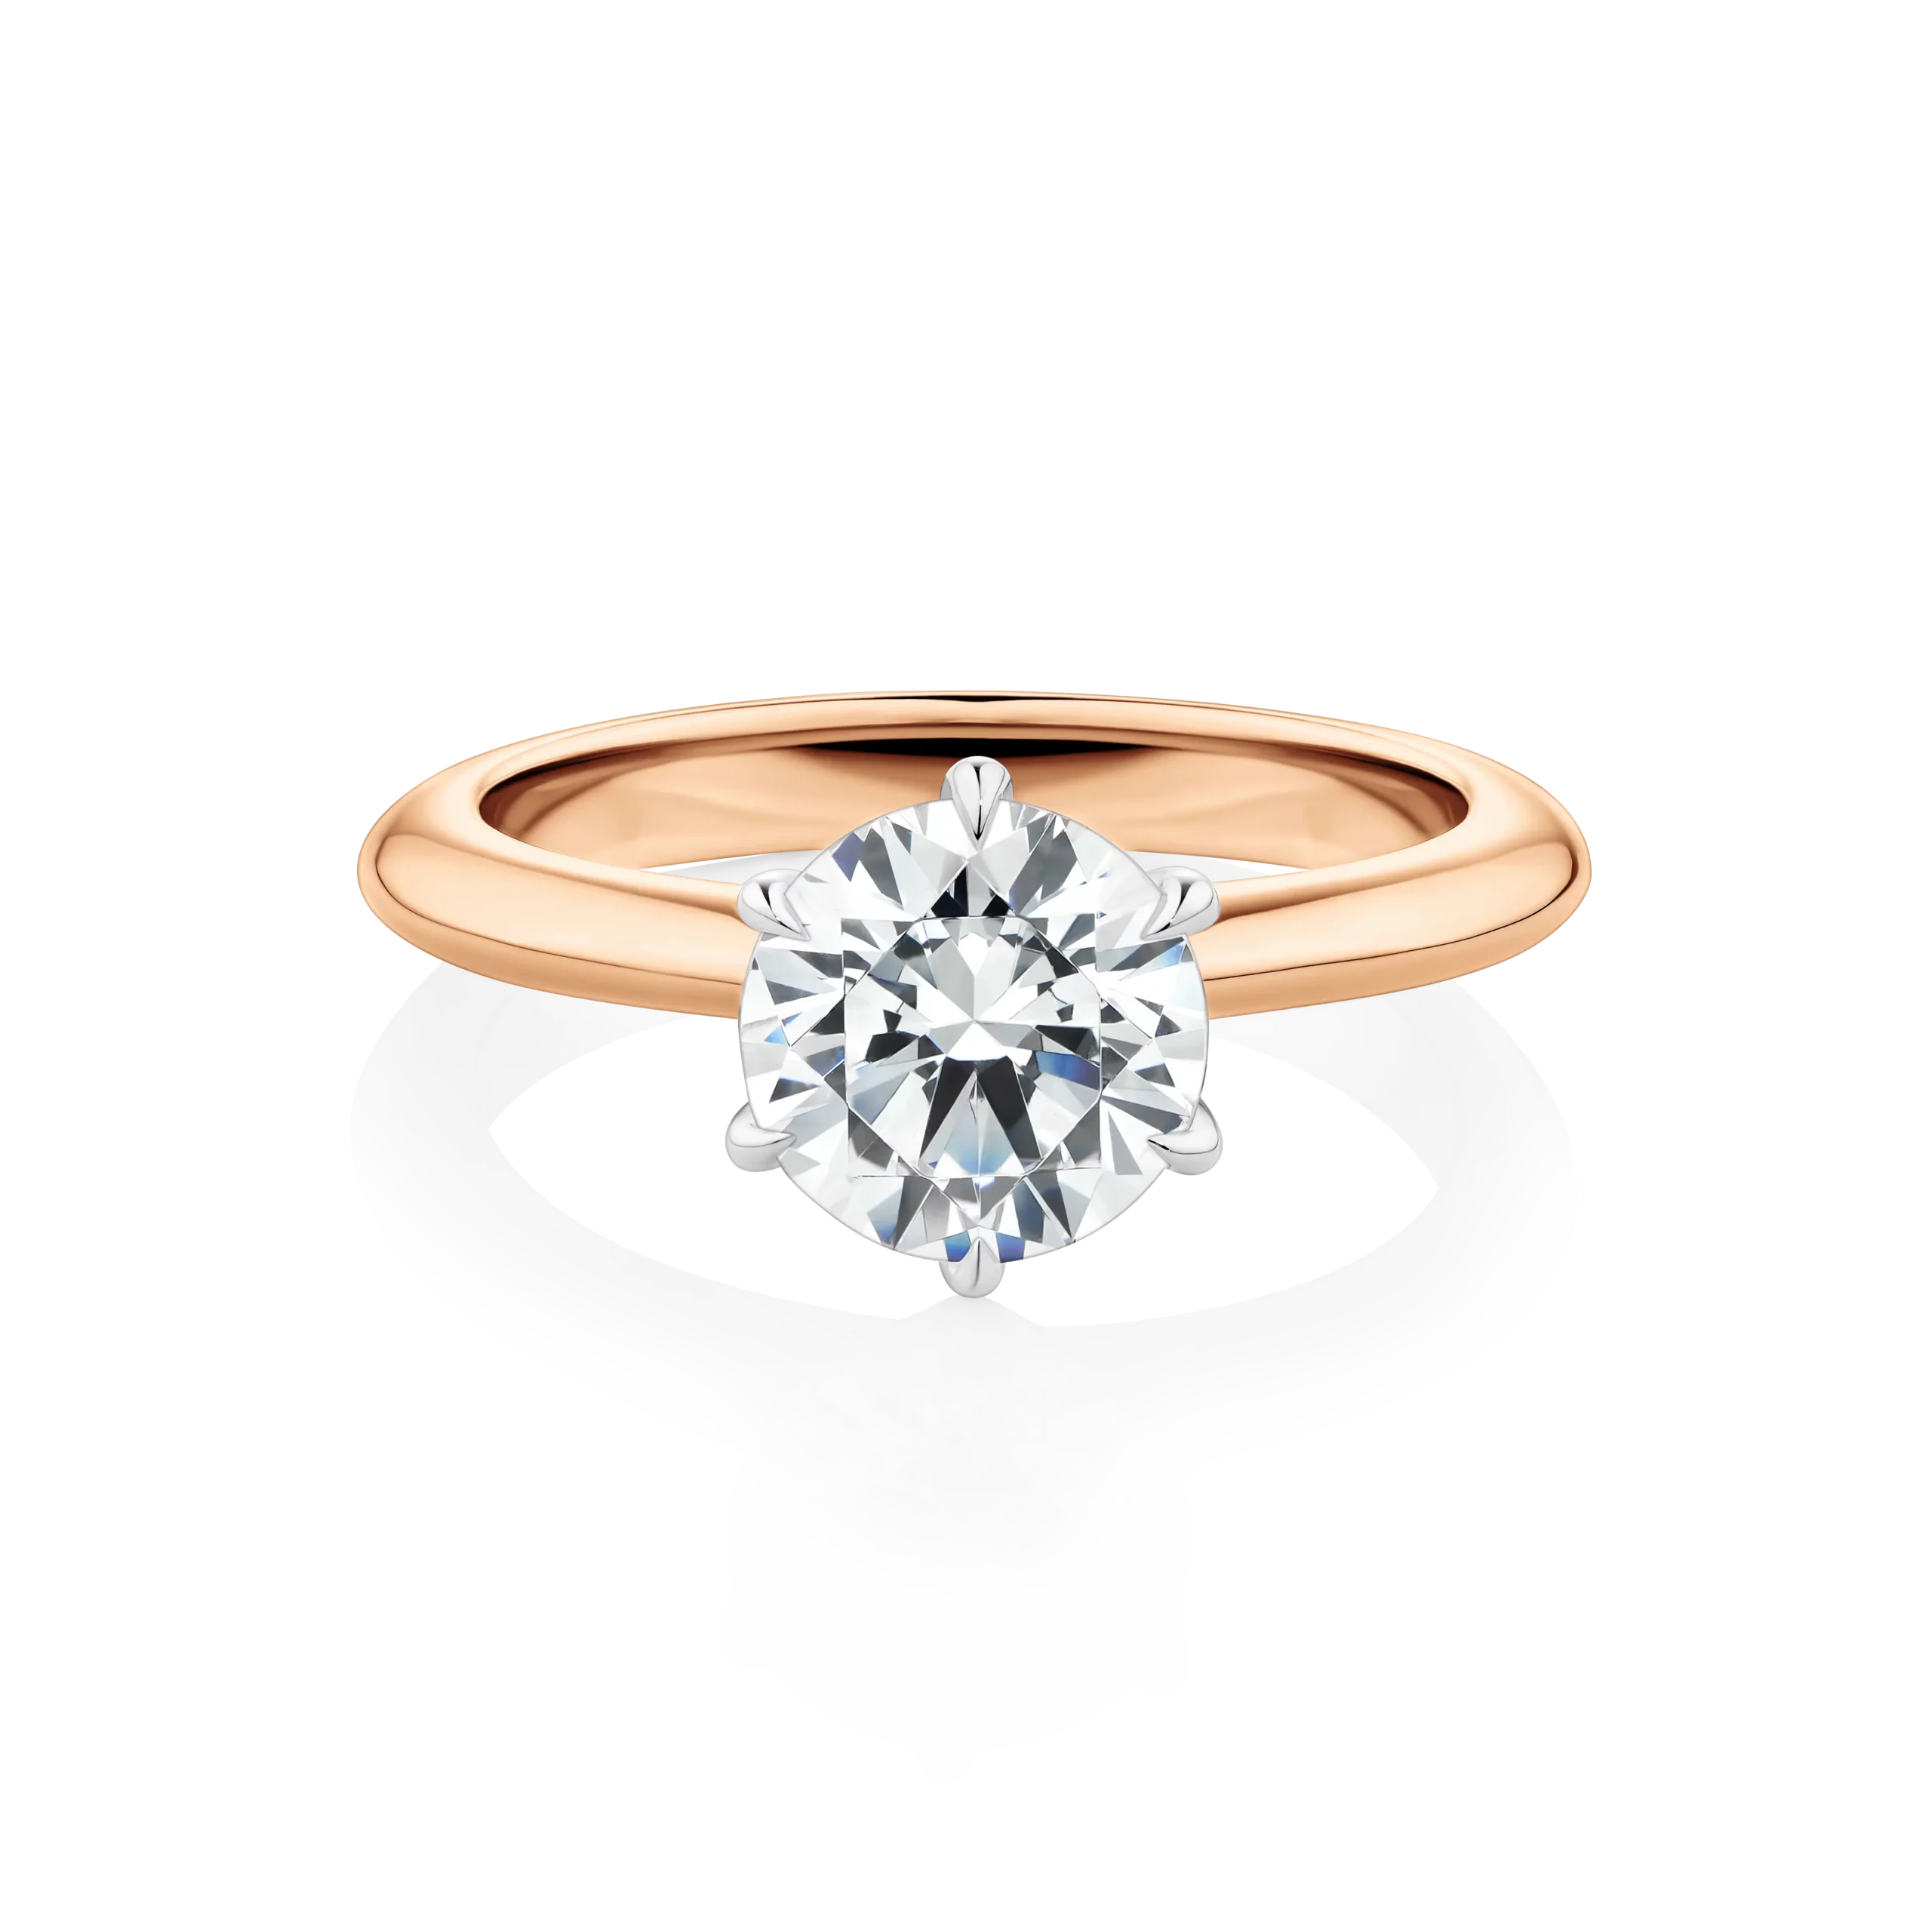 Southern-Star-Rose-Gold-Two-Tone-6-claw-Round-Cut-Diamond-Engagement-Ring